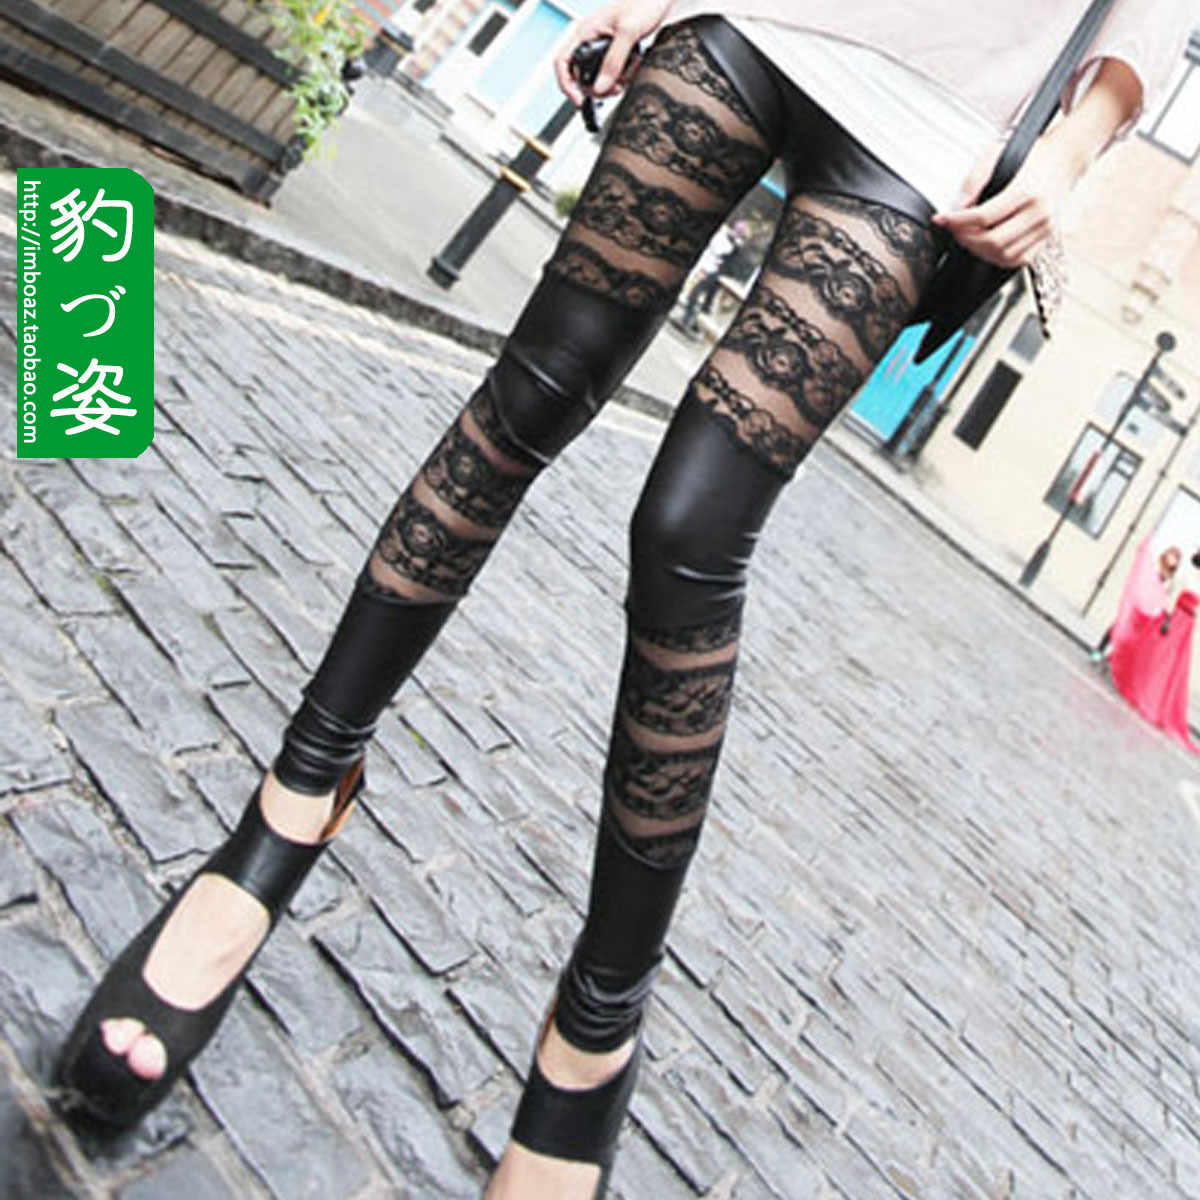 Women's limited edition 2012 autumn cutout solid color stockings product legging (WC029)